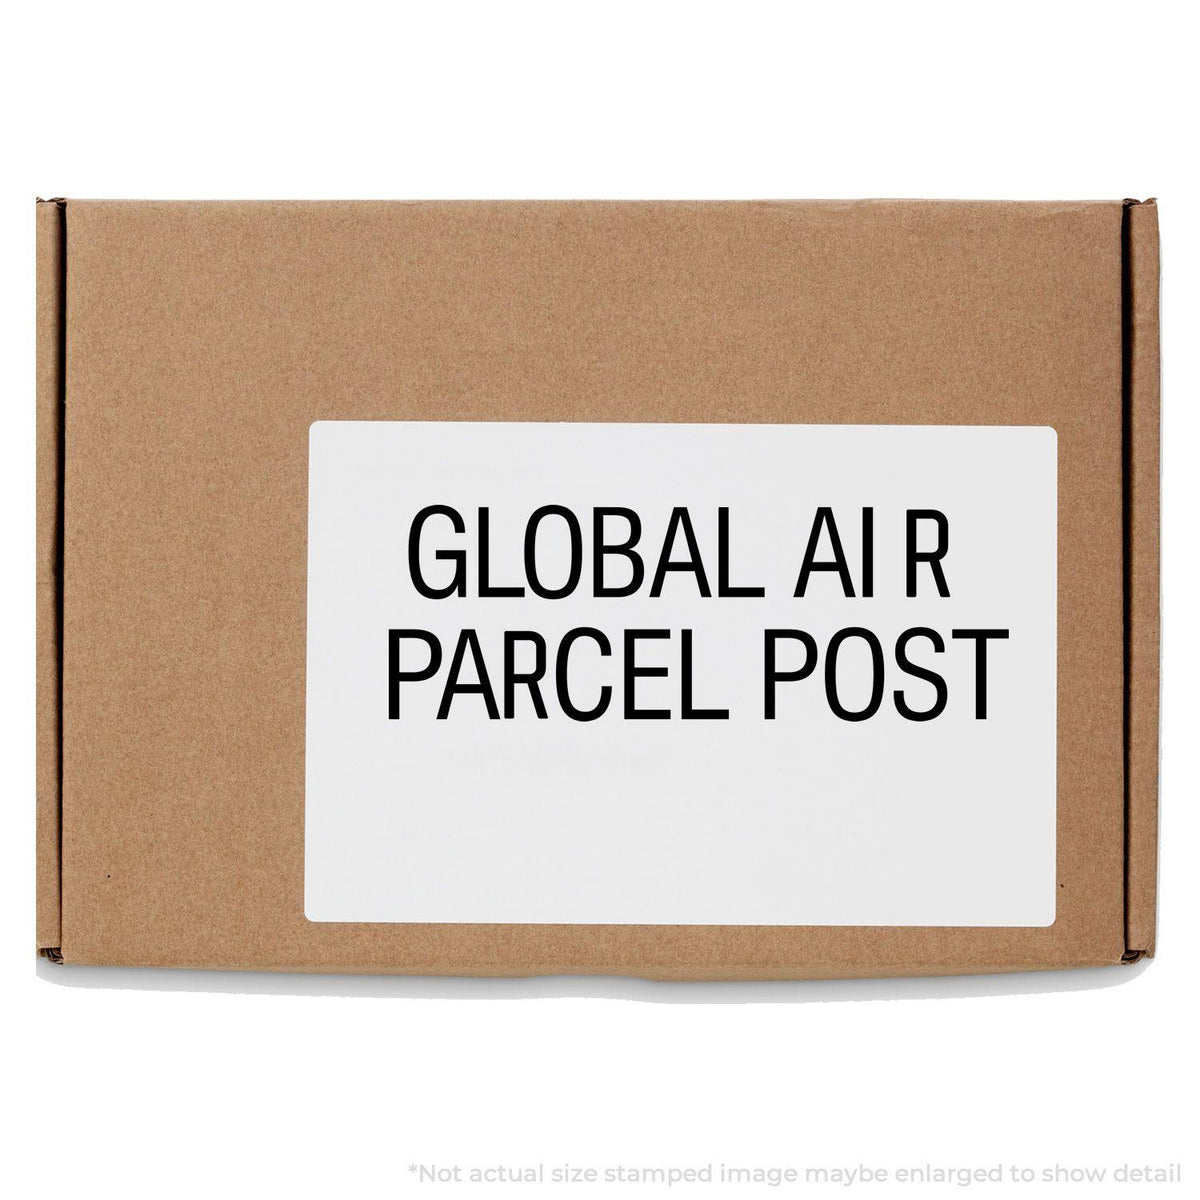 In Use Global Air Parcel Post Rubber Stamp Image